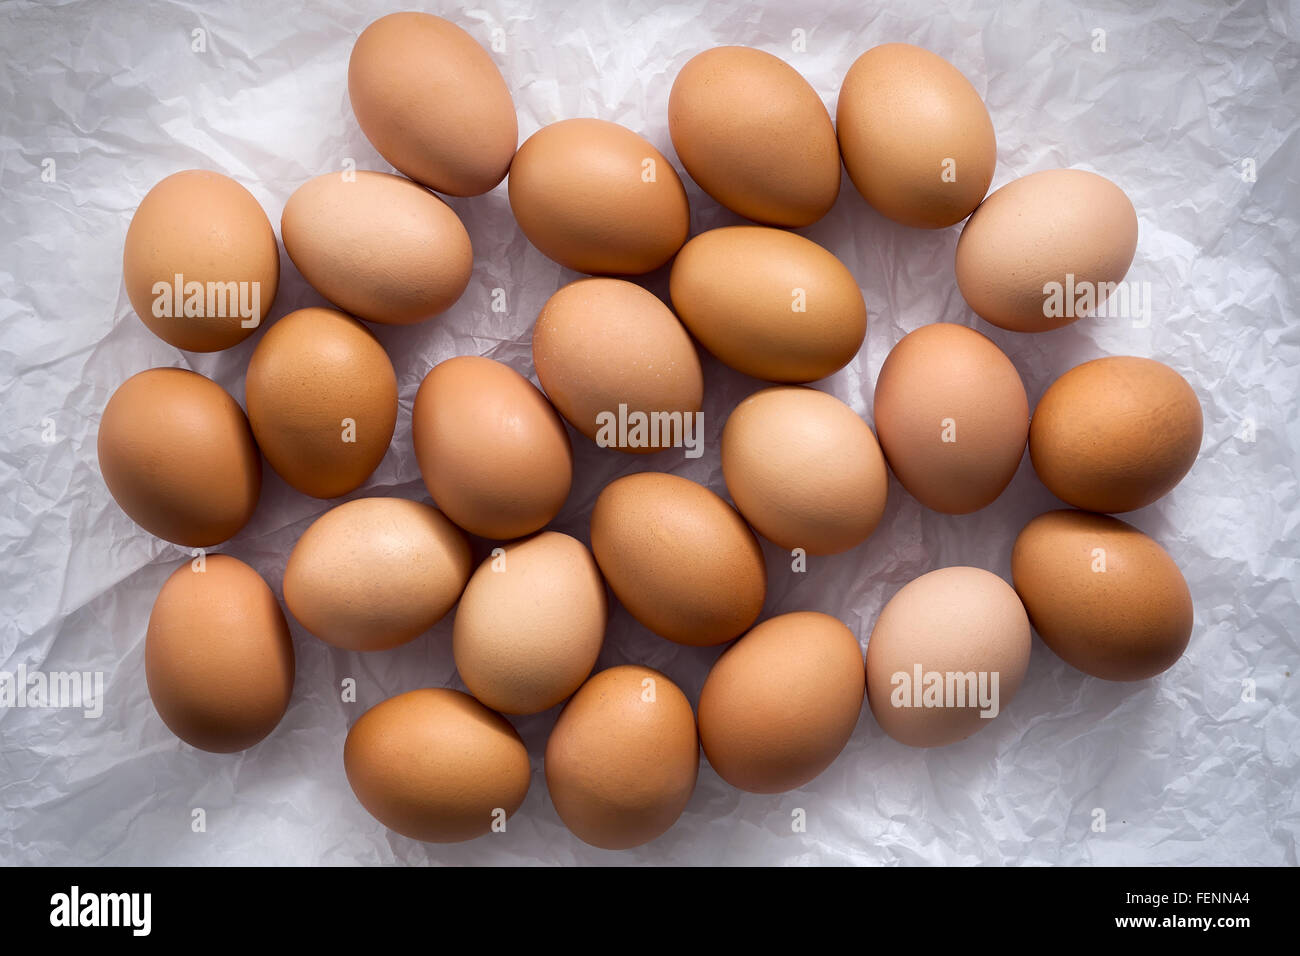 chicken eggs flat lay still life with food stylish fresh raw ingredient poultry healthy cholesterol protein vitamin natural rust Stock Photo